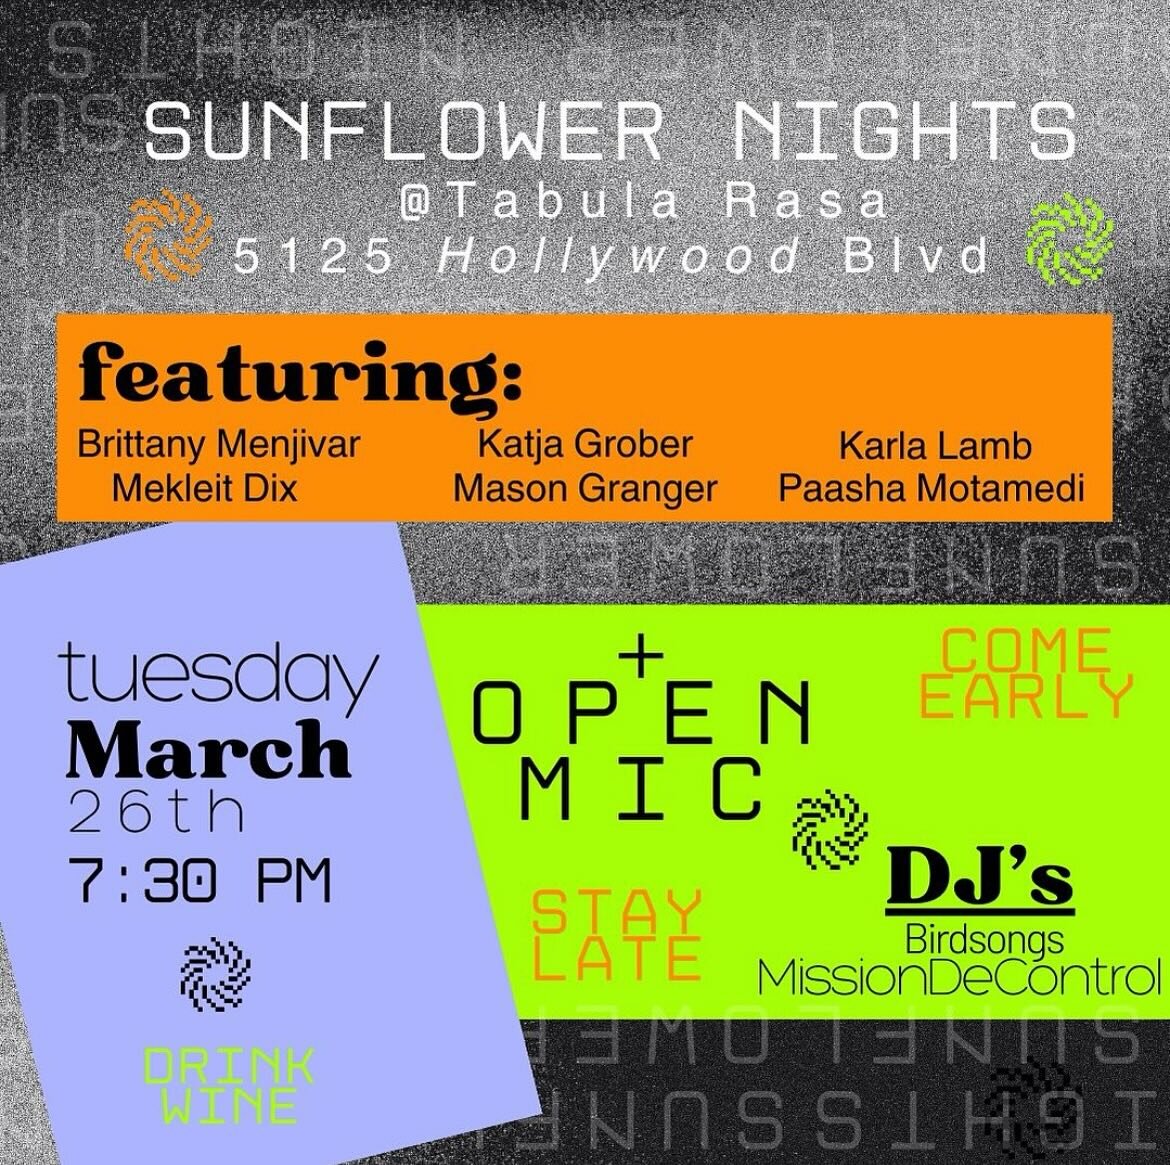 🌻🌜Sunflower Nights at Tabula Rasa Bar🌛 🌻 Tonight, Tuesday March 26th at 7:30 is poetry night with @sunflowerstationpress , tunes by our very own @pjzettle